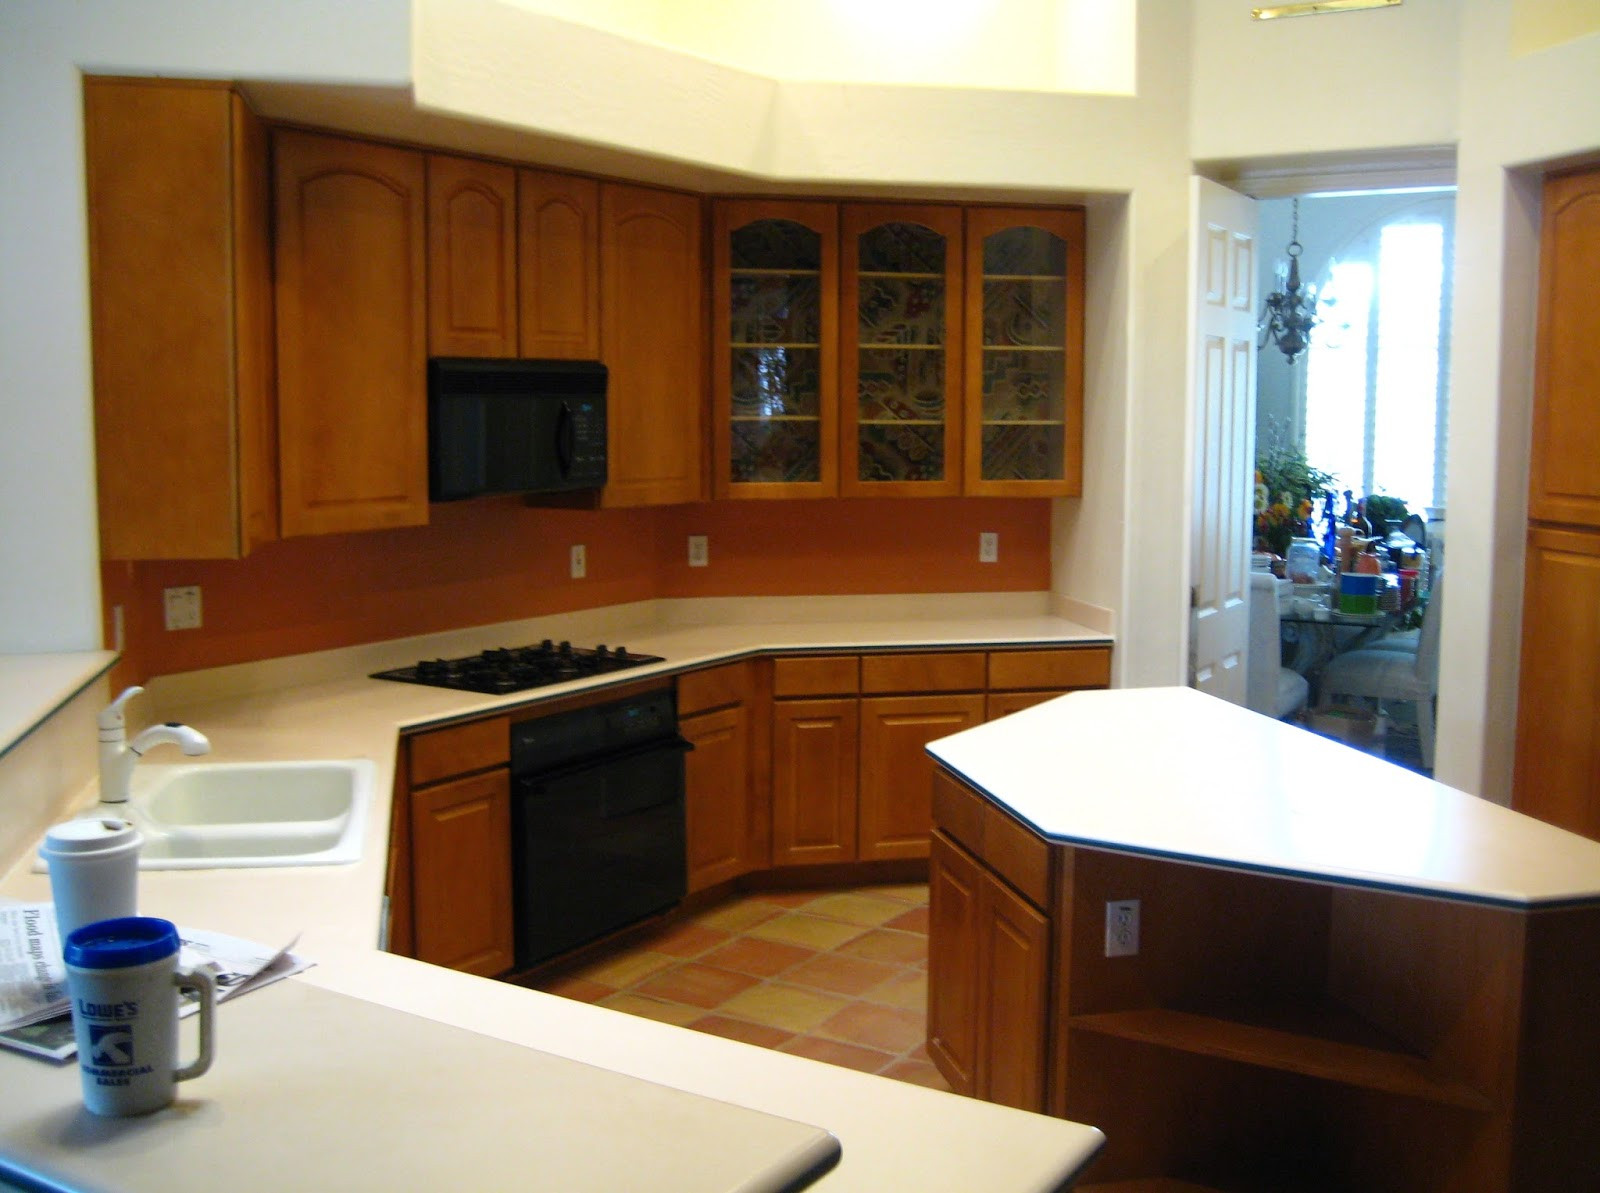 Diy Kitchen Remodel Ideas
 Do it Yourself DIY Kitchen Remodel on a Bud Home